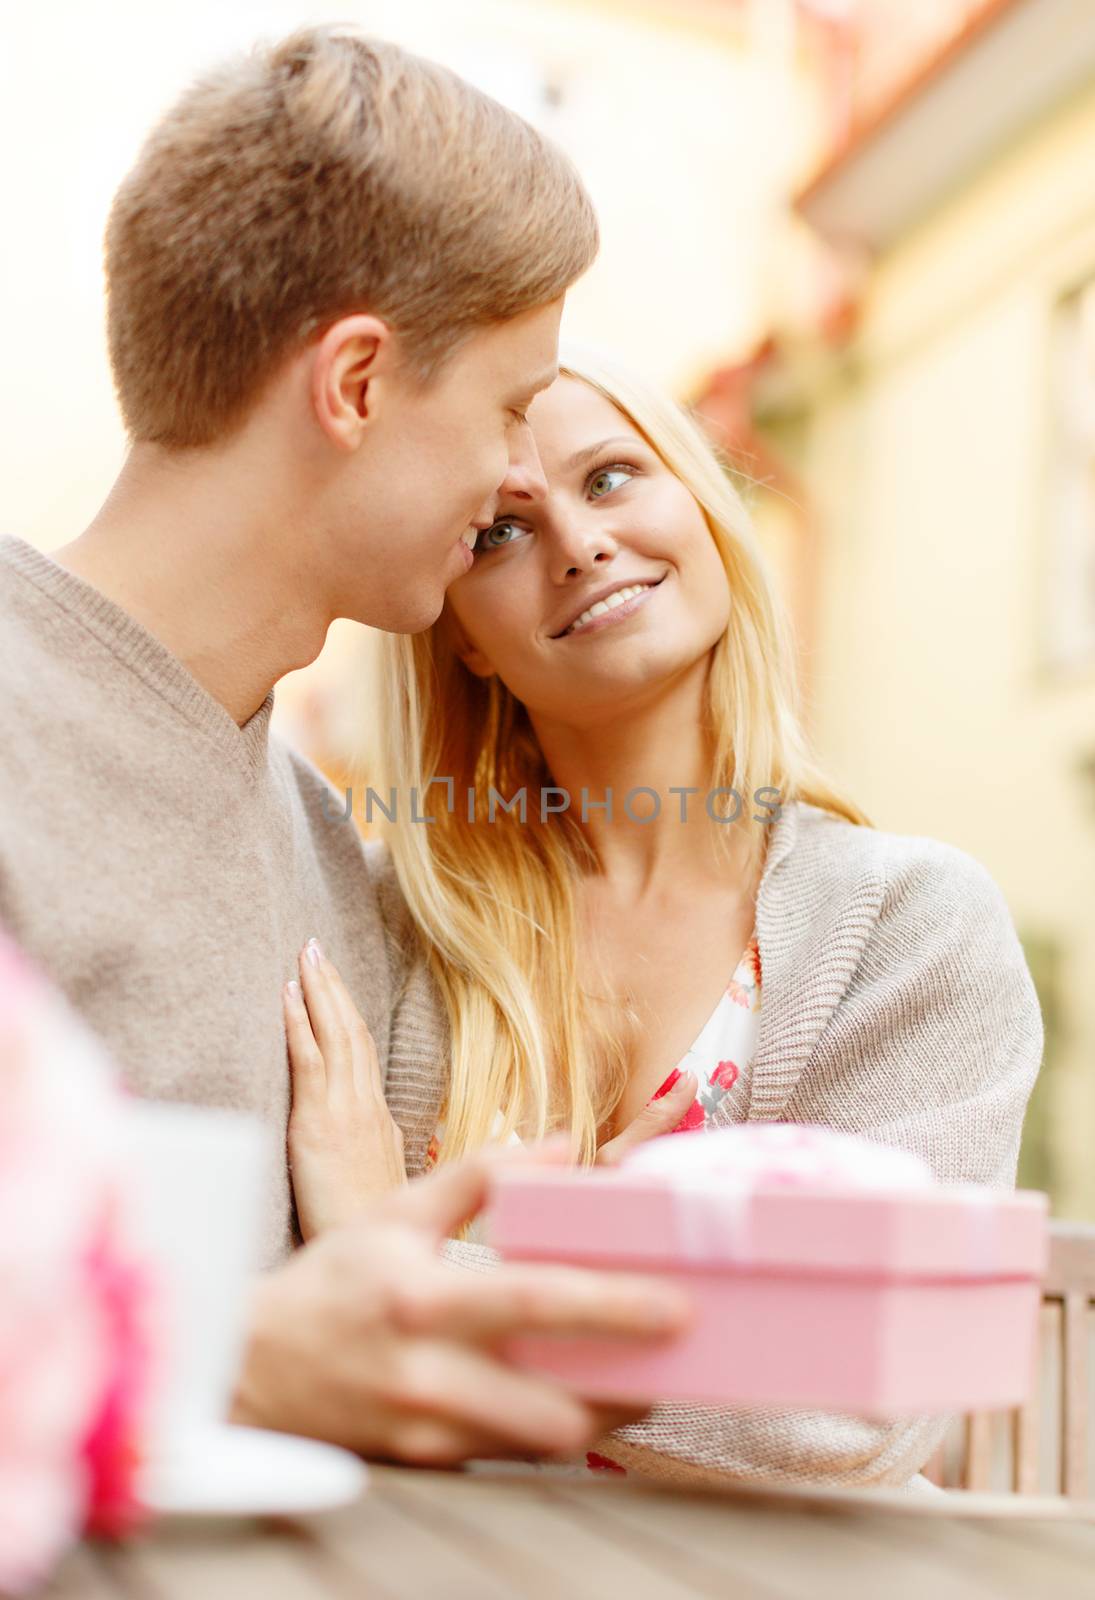 summer holidays, love, travel, tourism, relationship and dating concept - romantic happy couple with gift in the cafe